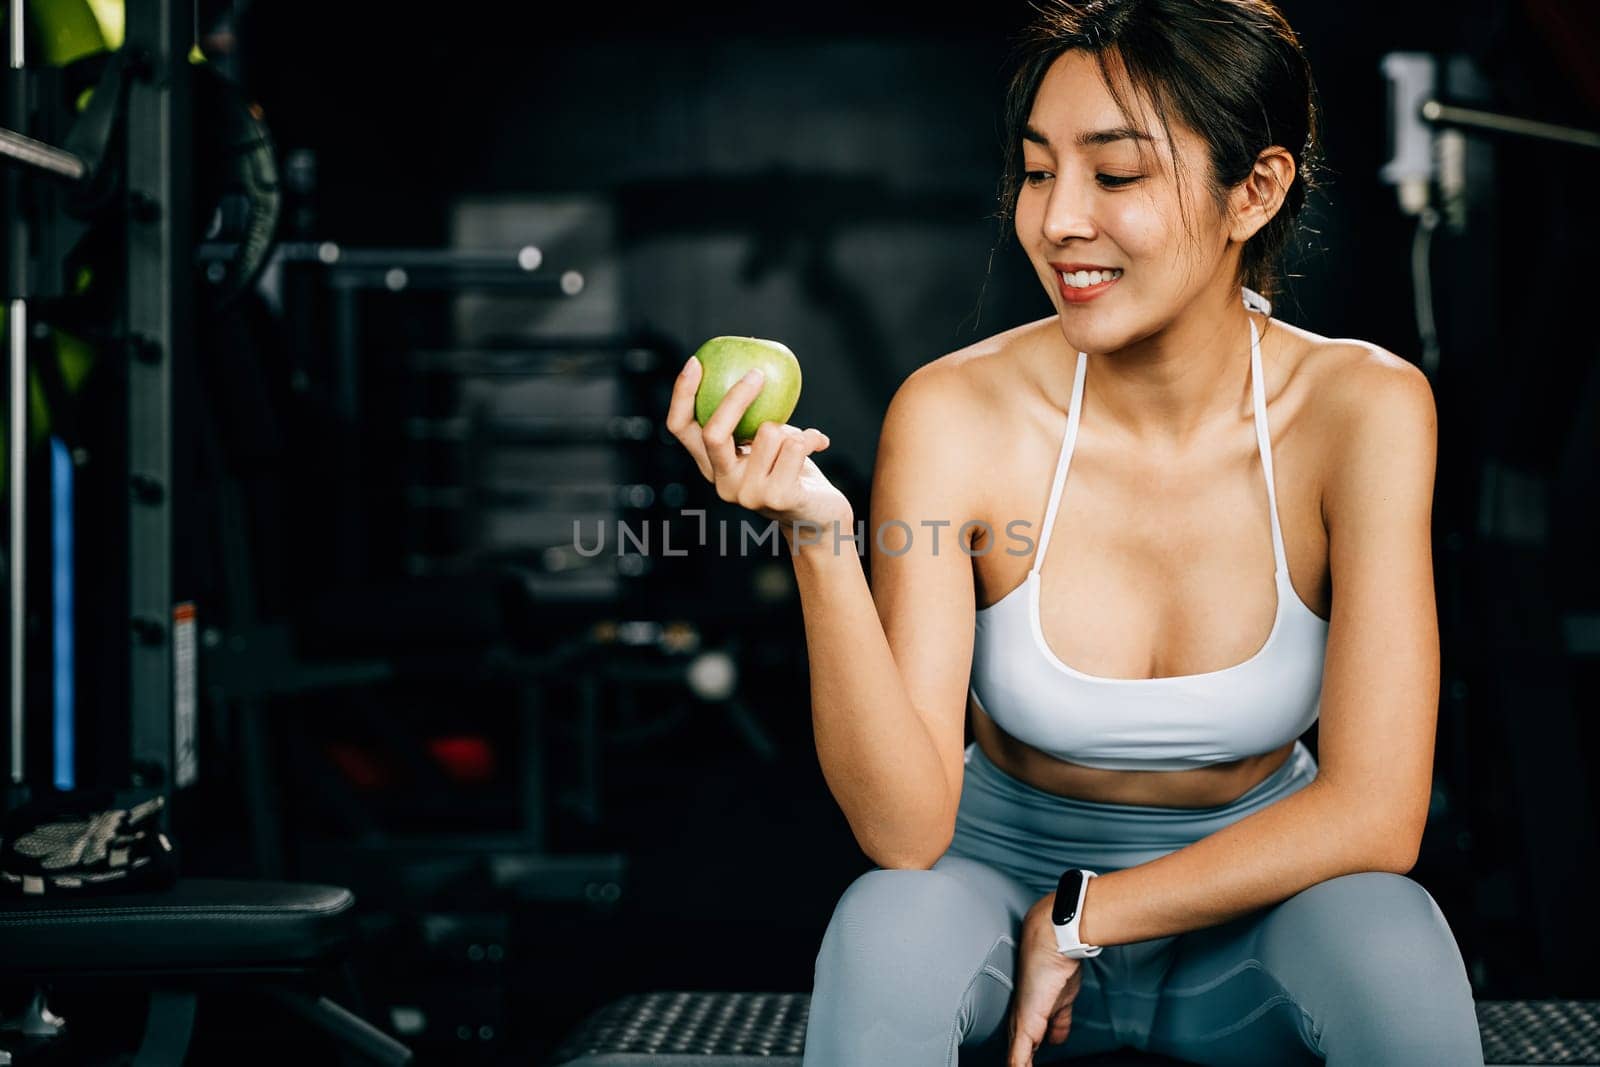 Asian woman holding a green apple in a fitness gym by Sorapop